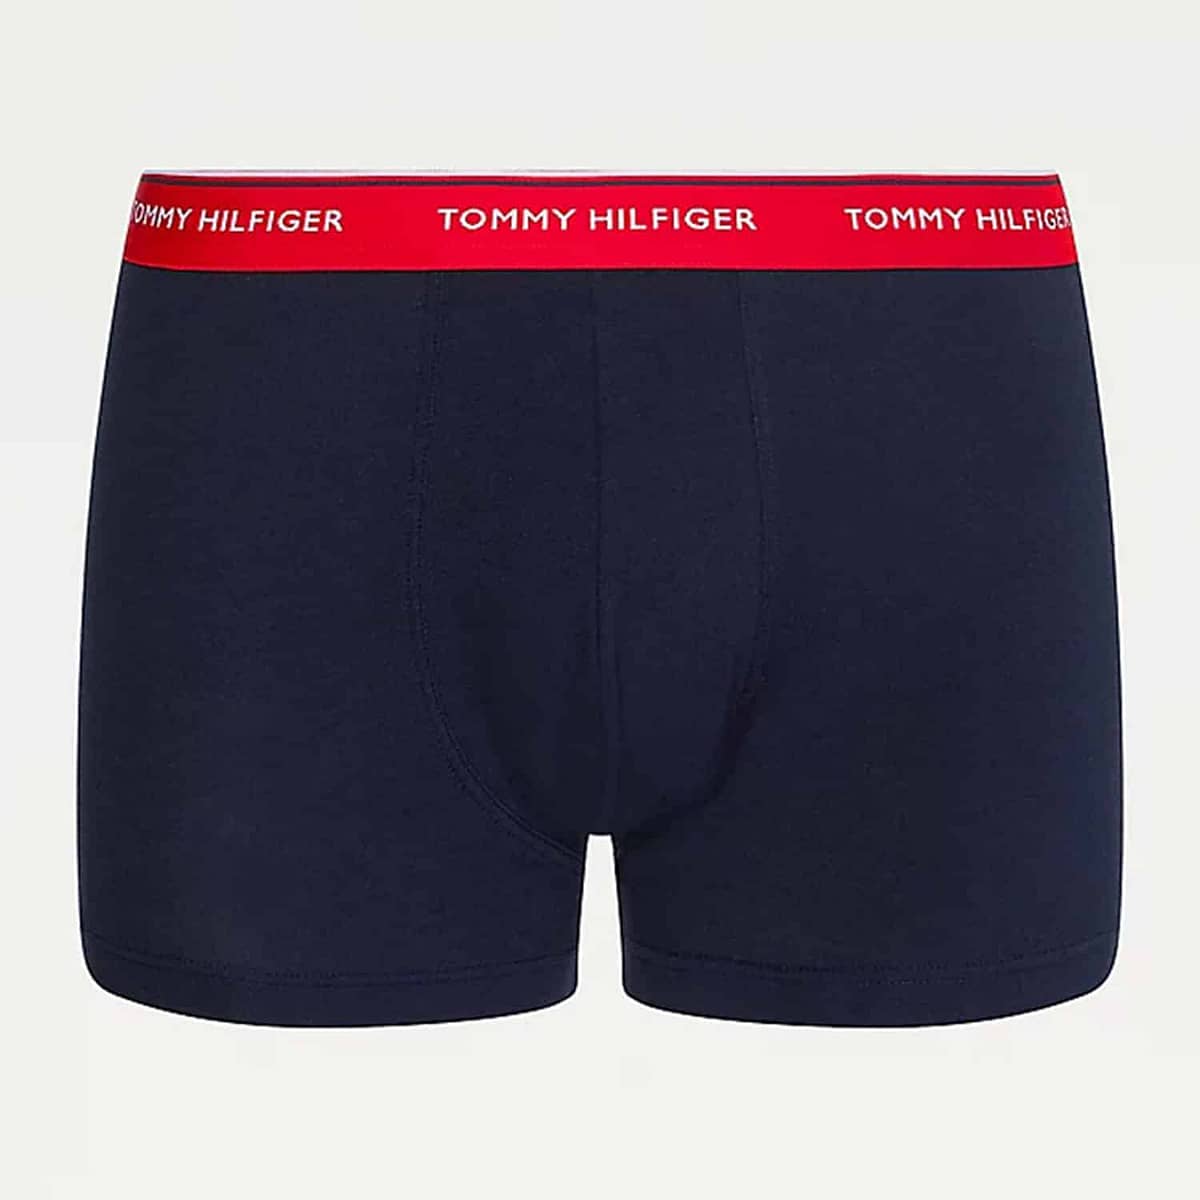 3 pack boxer aderenti Tommy Hilfiger